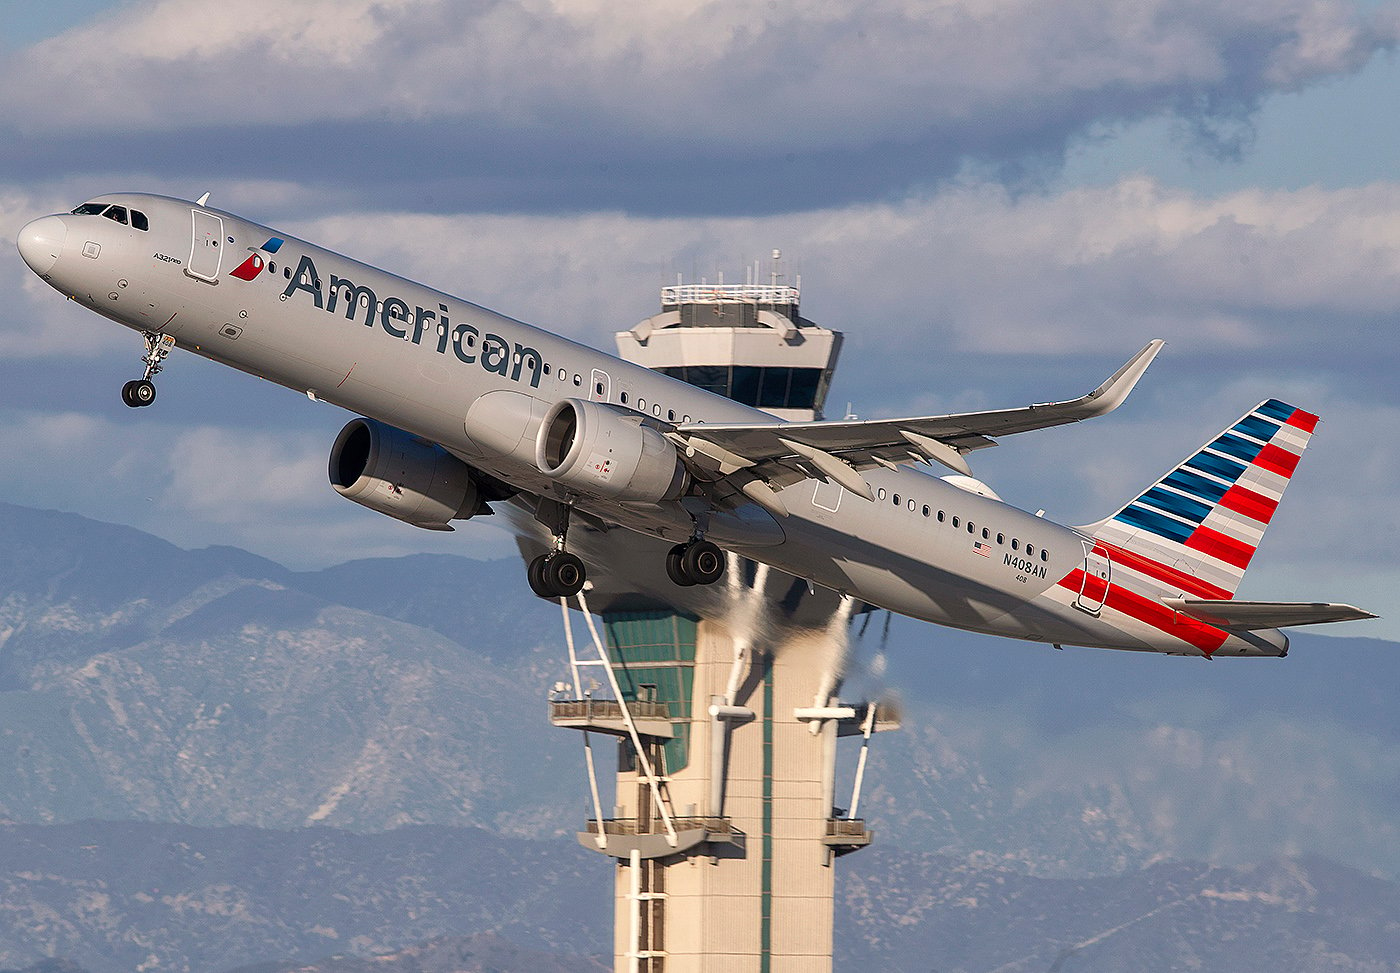 American Airlines will drop flights to 15 cities in October